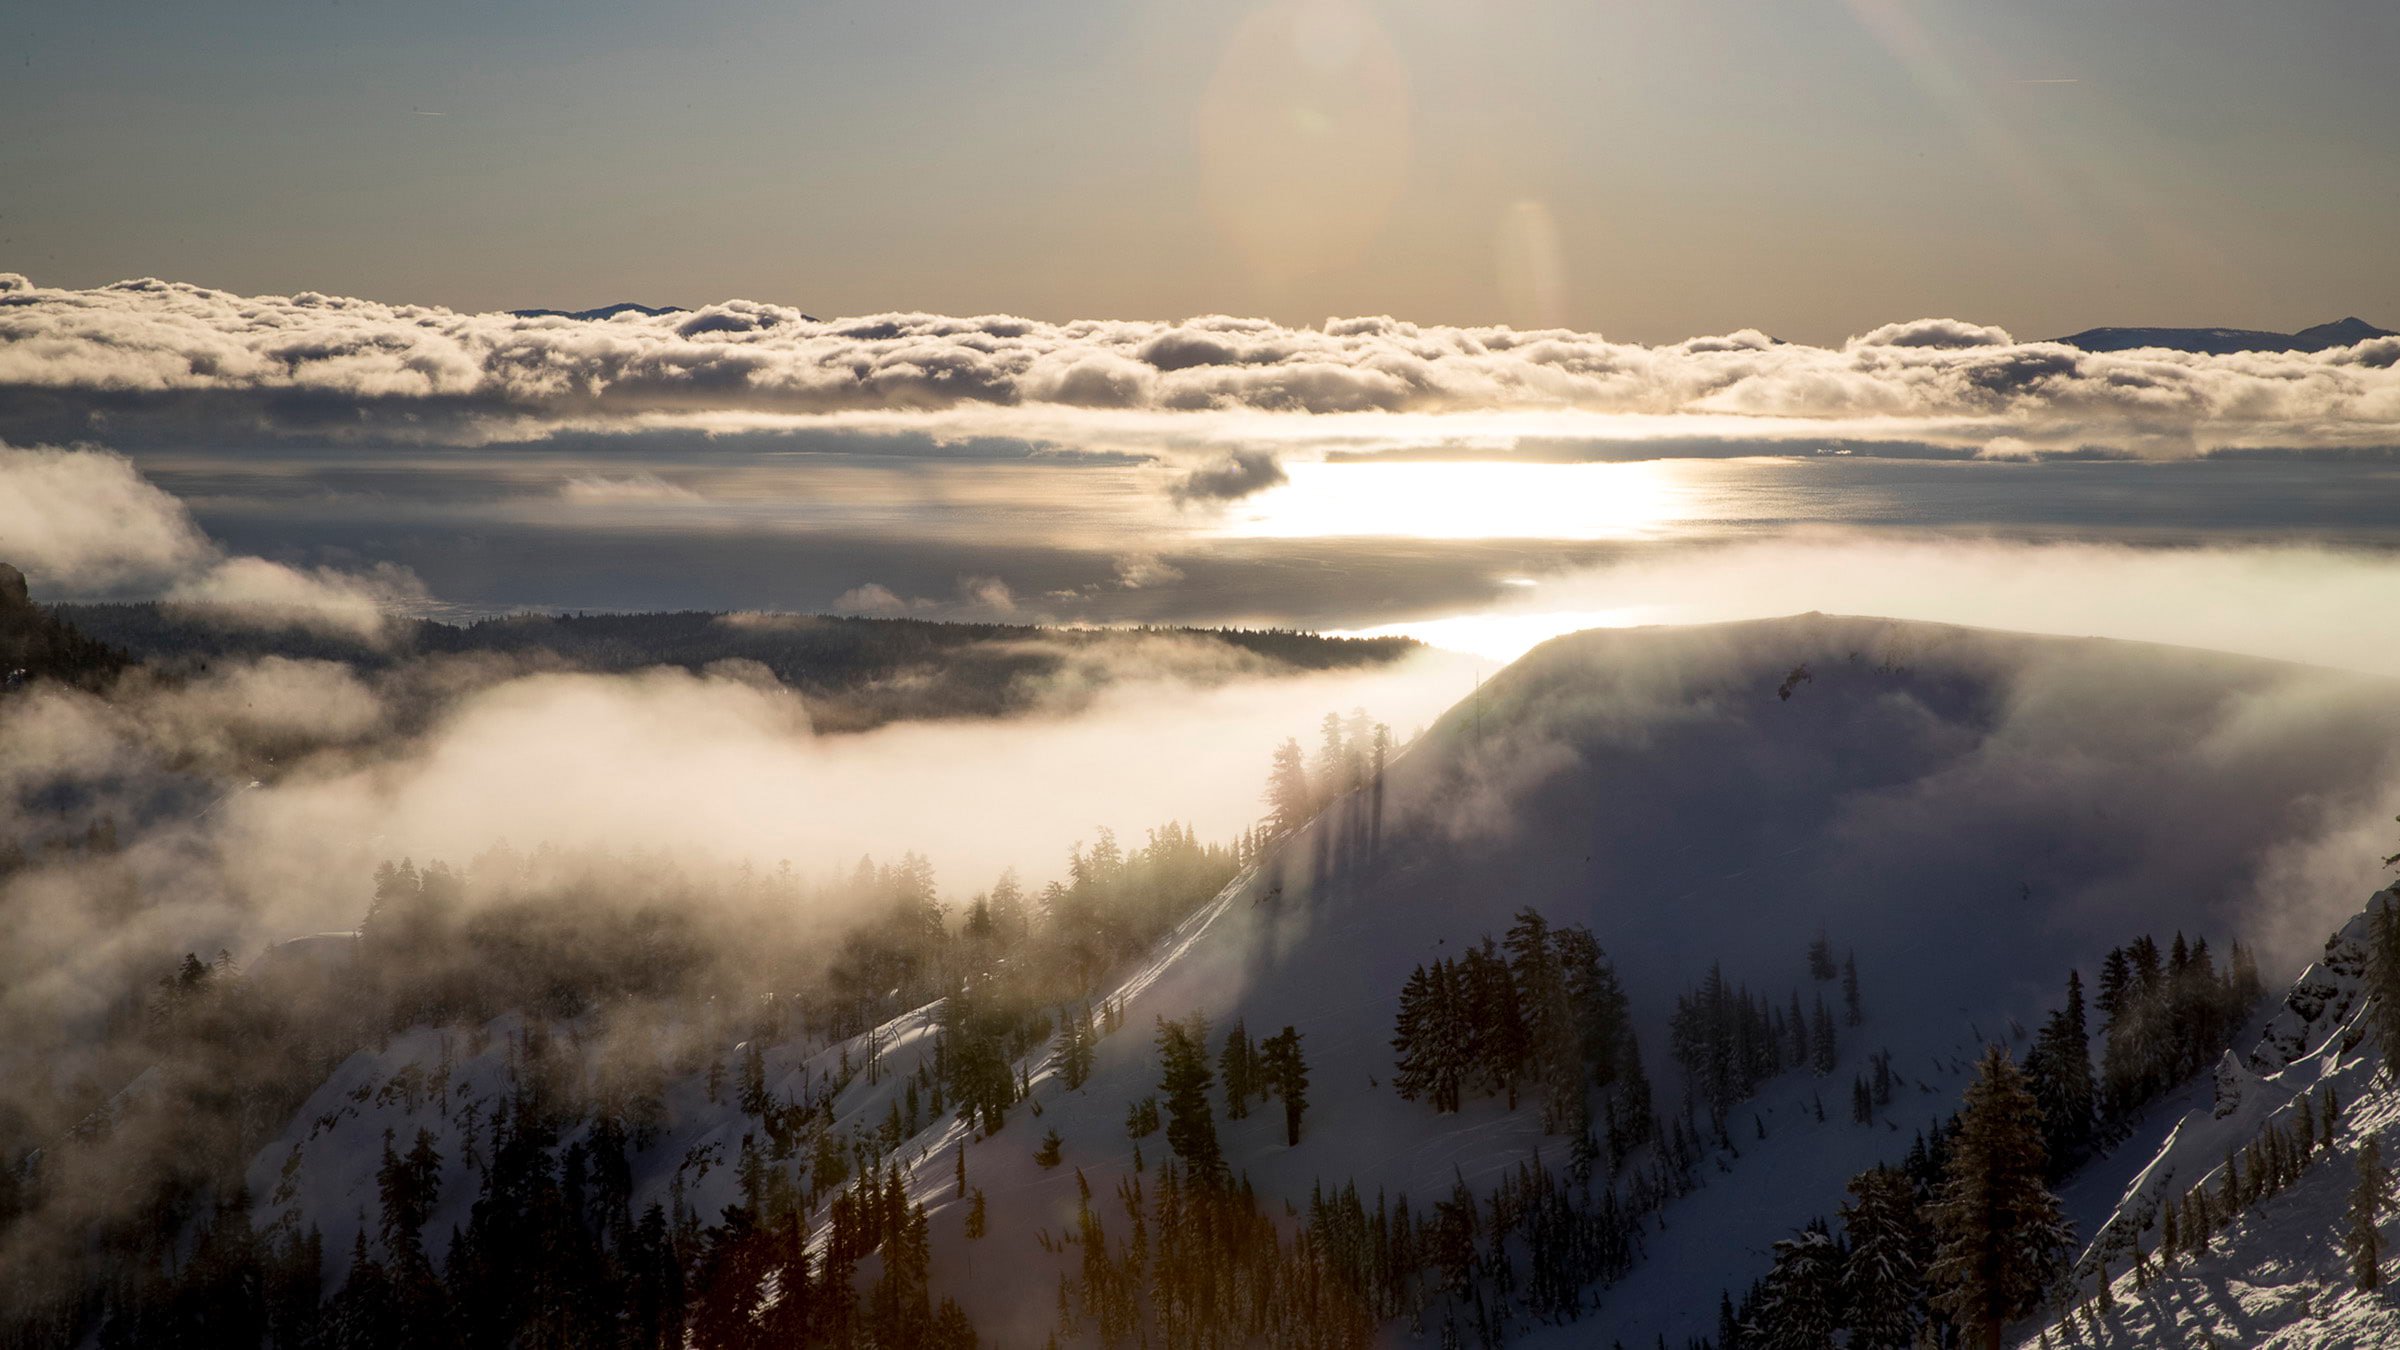 Sunrise at Alpine Meadows with views of Lake Tahoe